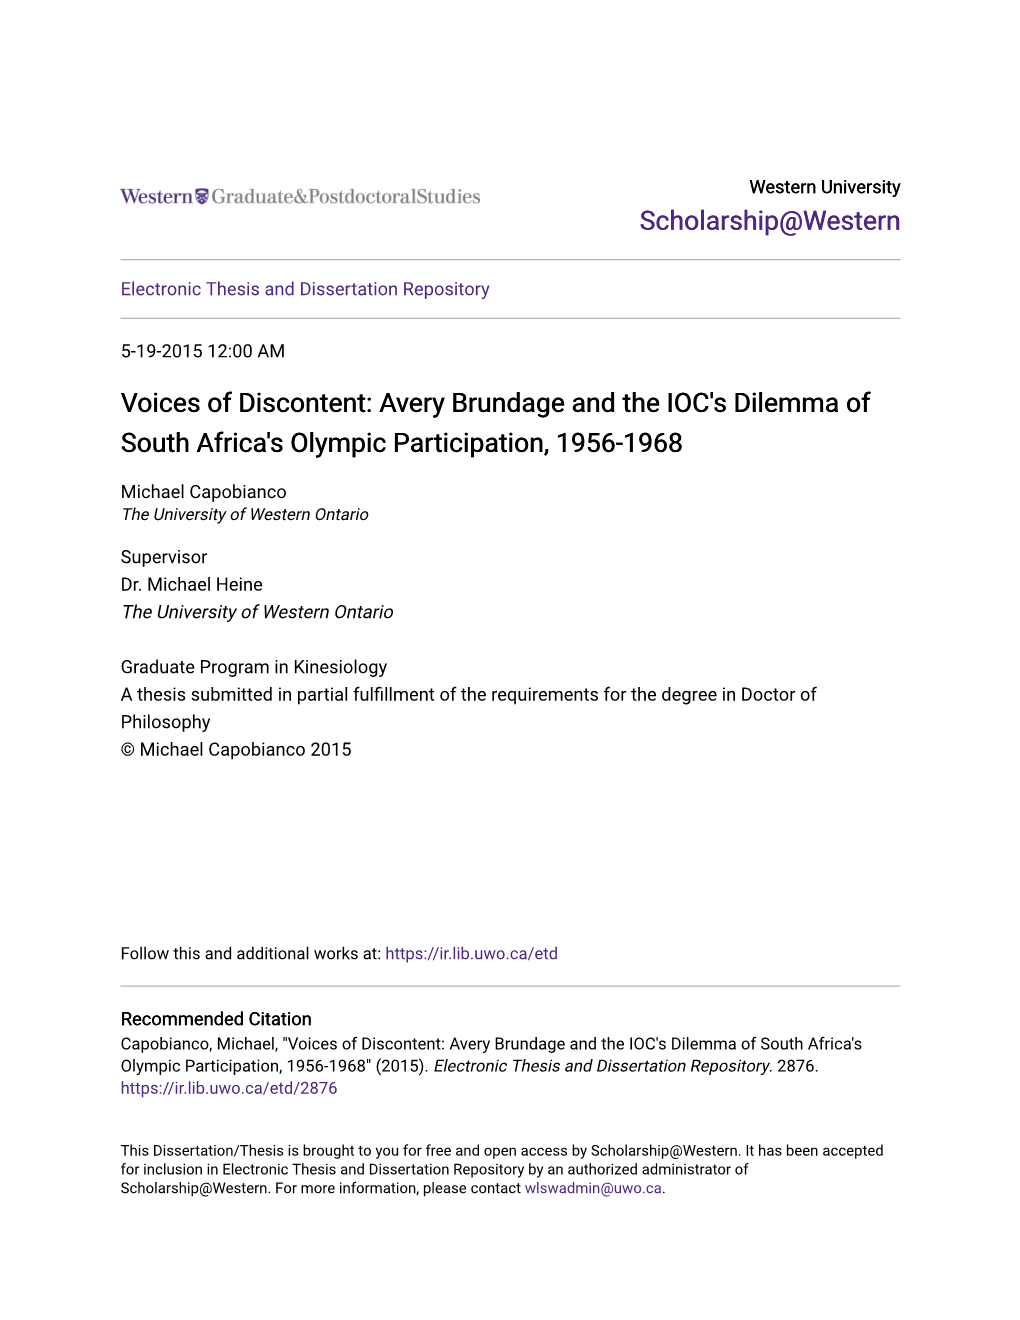 Avery Brundage and the IOC's Dilemma of South Africa's Olympic Participation, 1956-1968